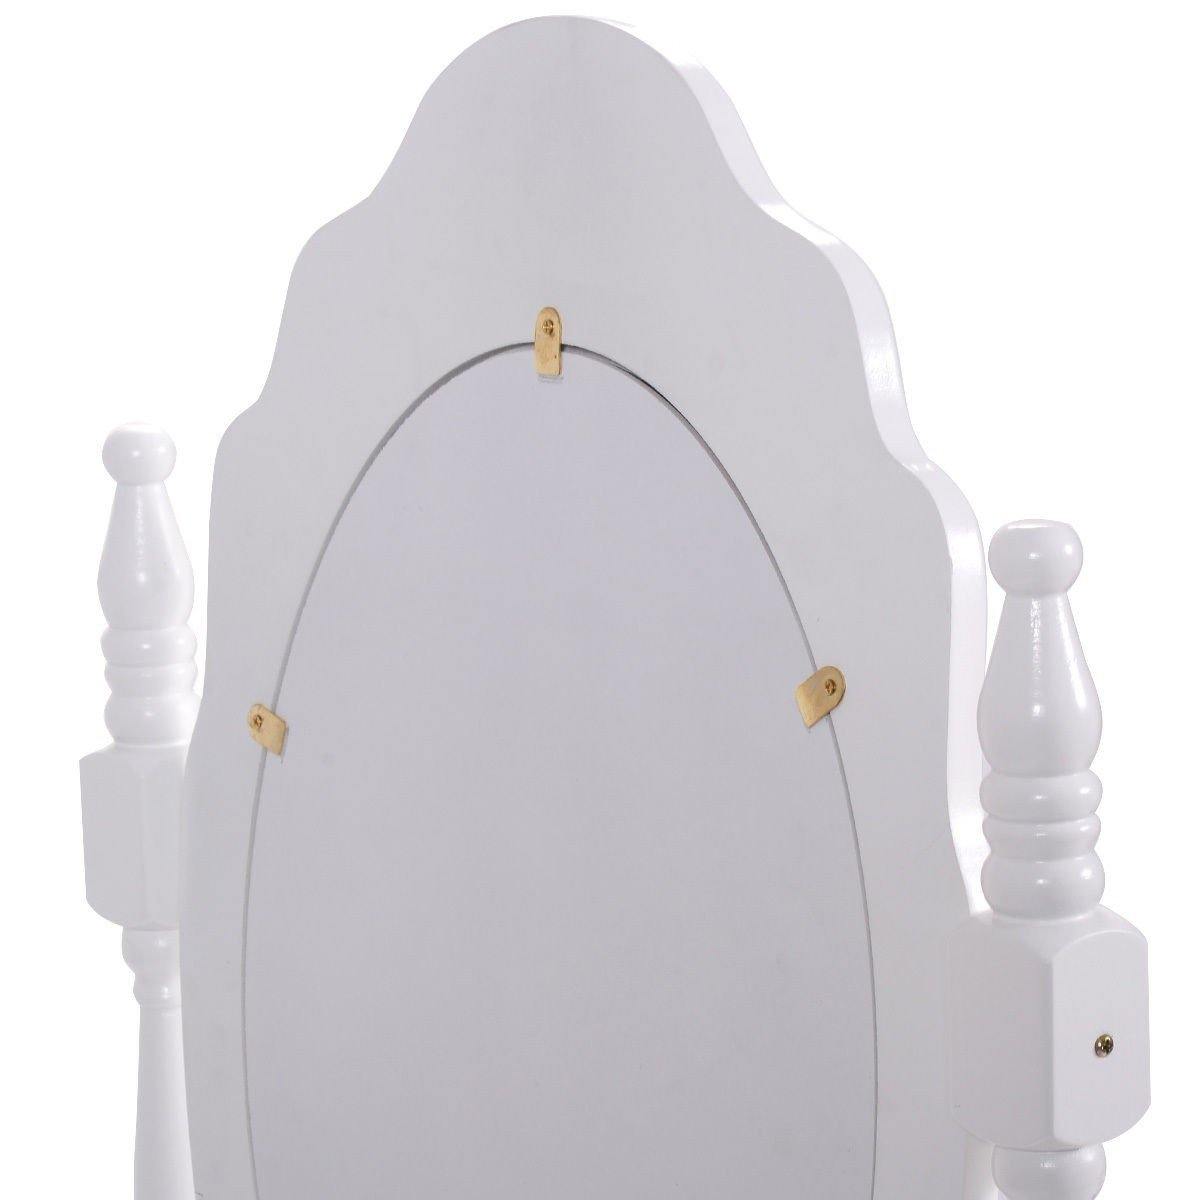 Vanity Table Set with Mirror and Stool for Bedroom 3 Drawers (White) - Giantexus